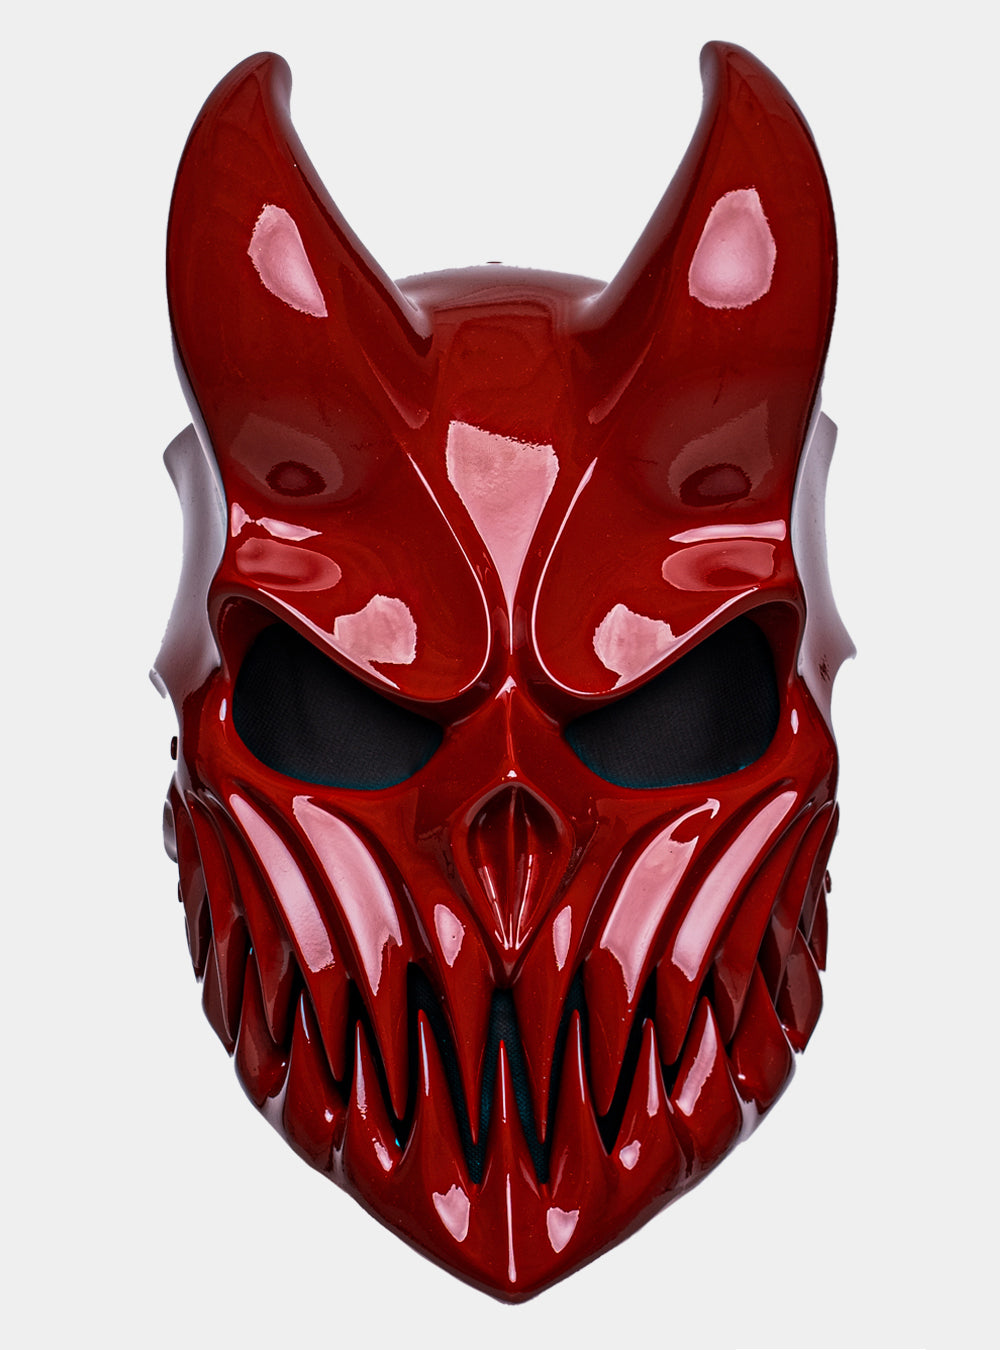 (SLAUGHTER TO PREVAIL) ALEX TERRIBLE MASK “KID OF DARKNESS” (RED)